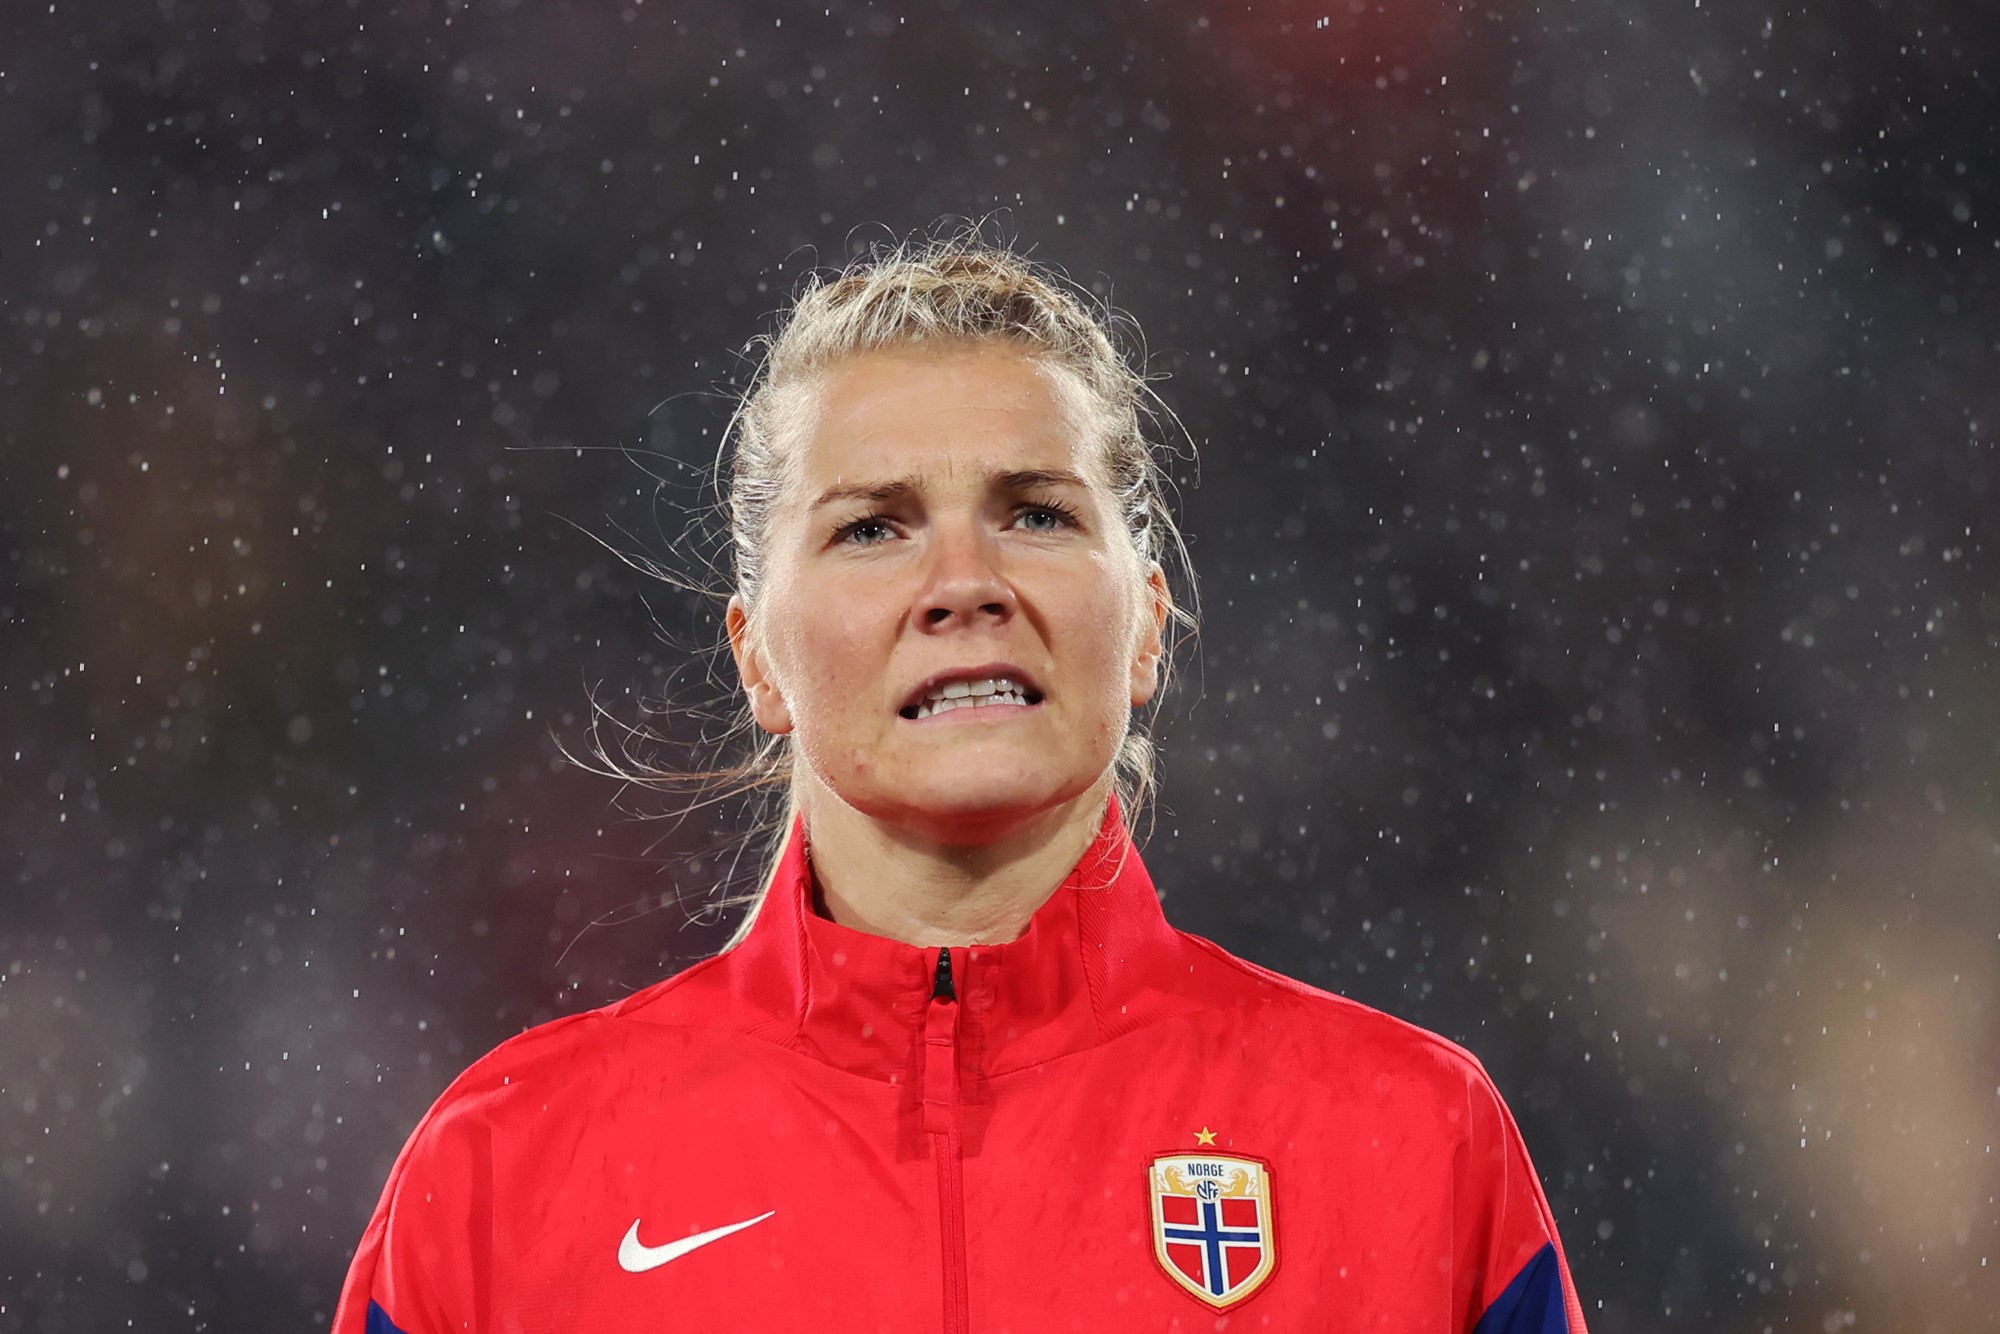 Norway's Ada Hegerberg stands in the rain in a red top at night before a FIFA Women's World Cup match